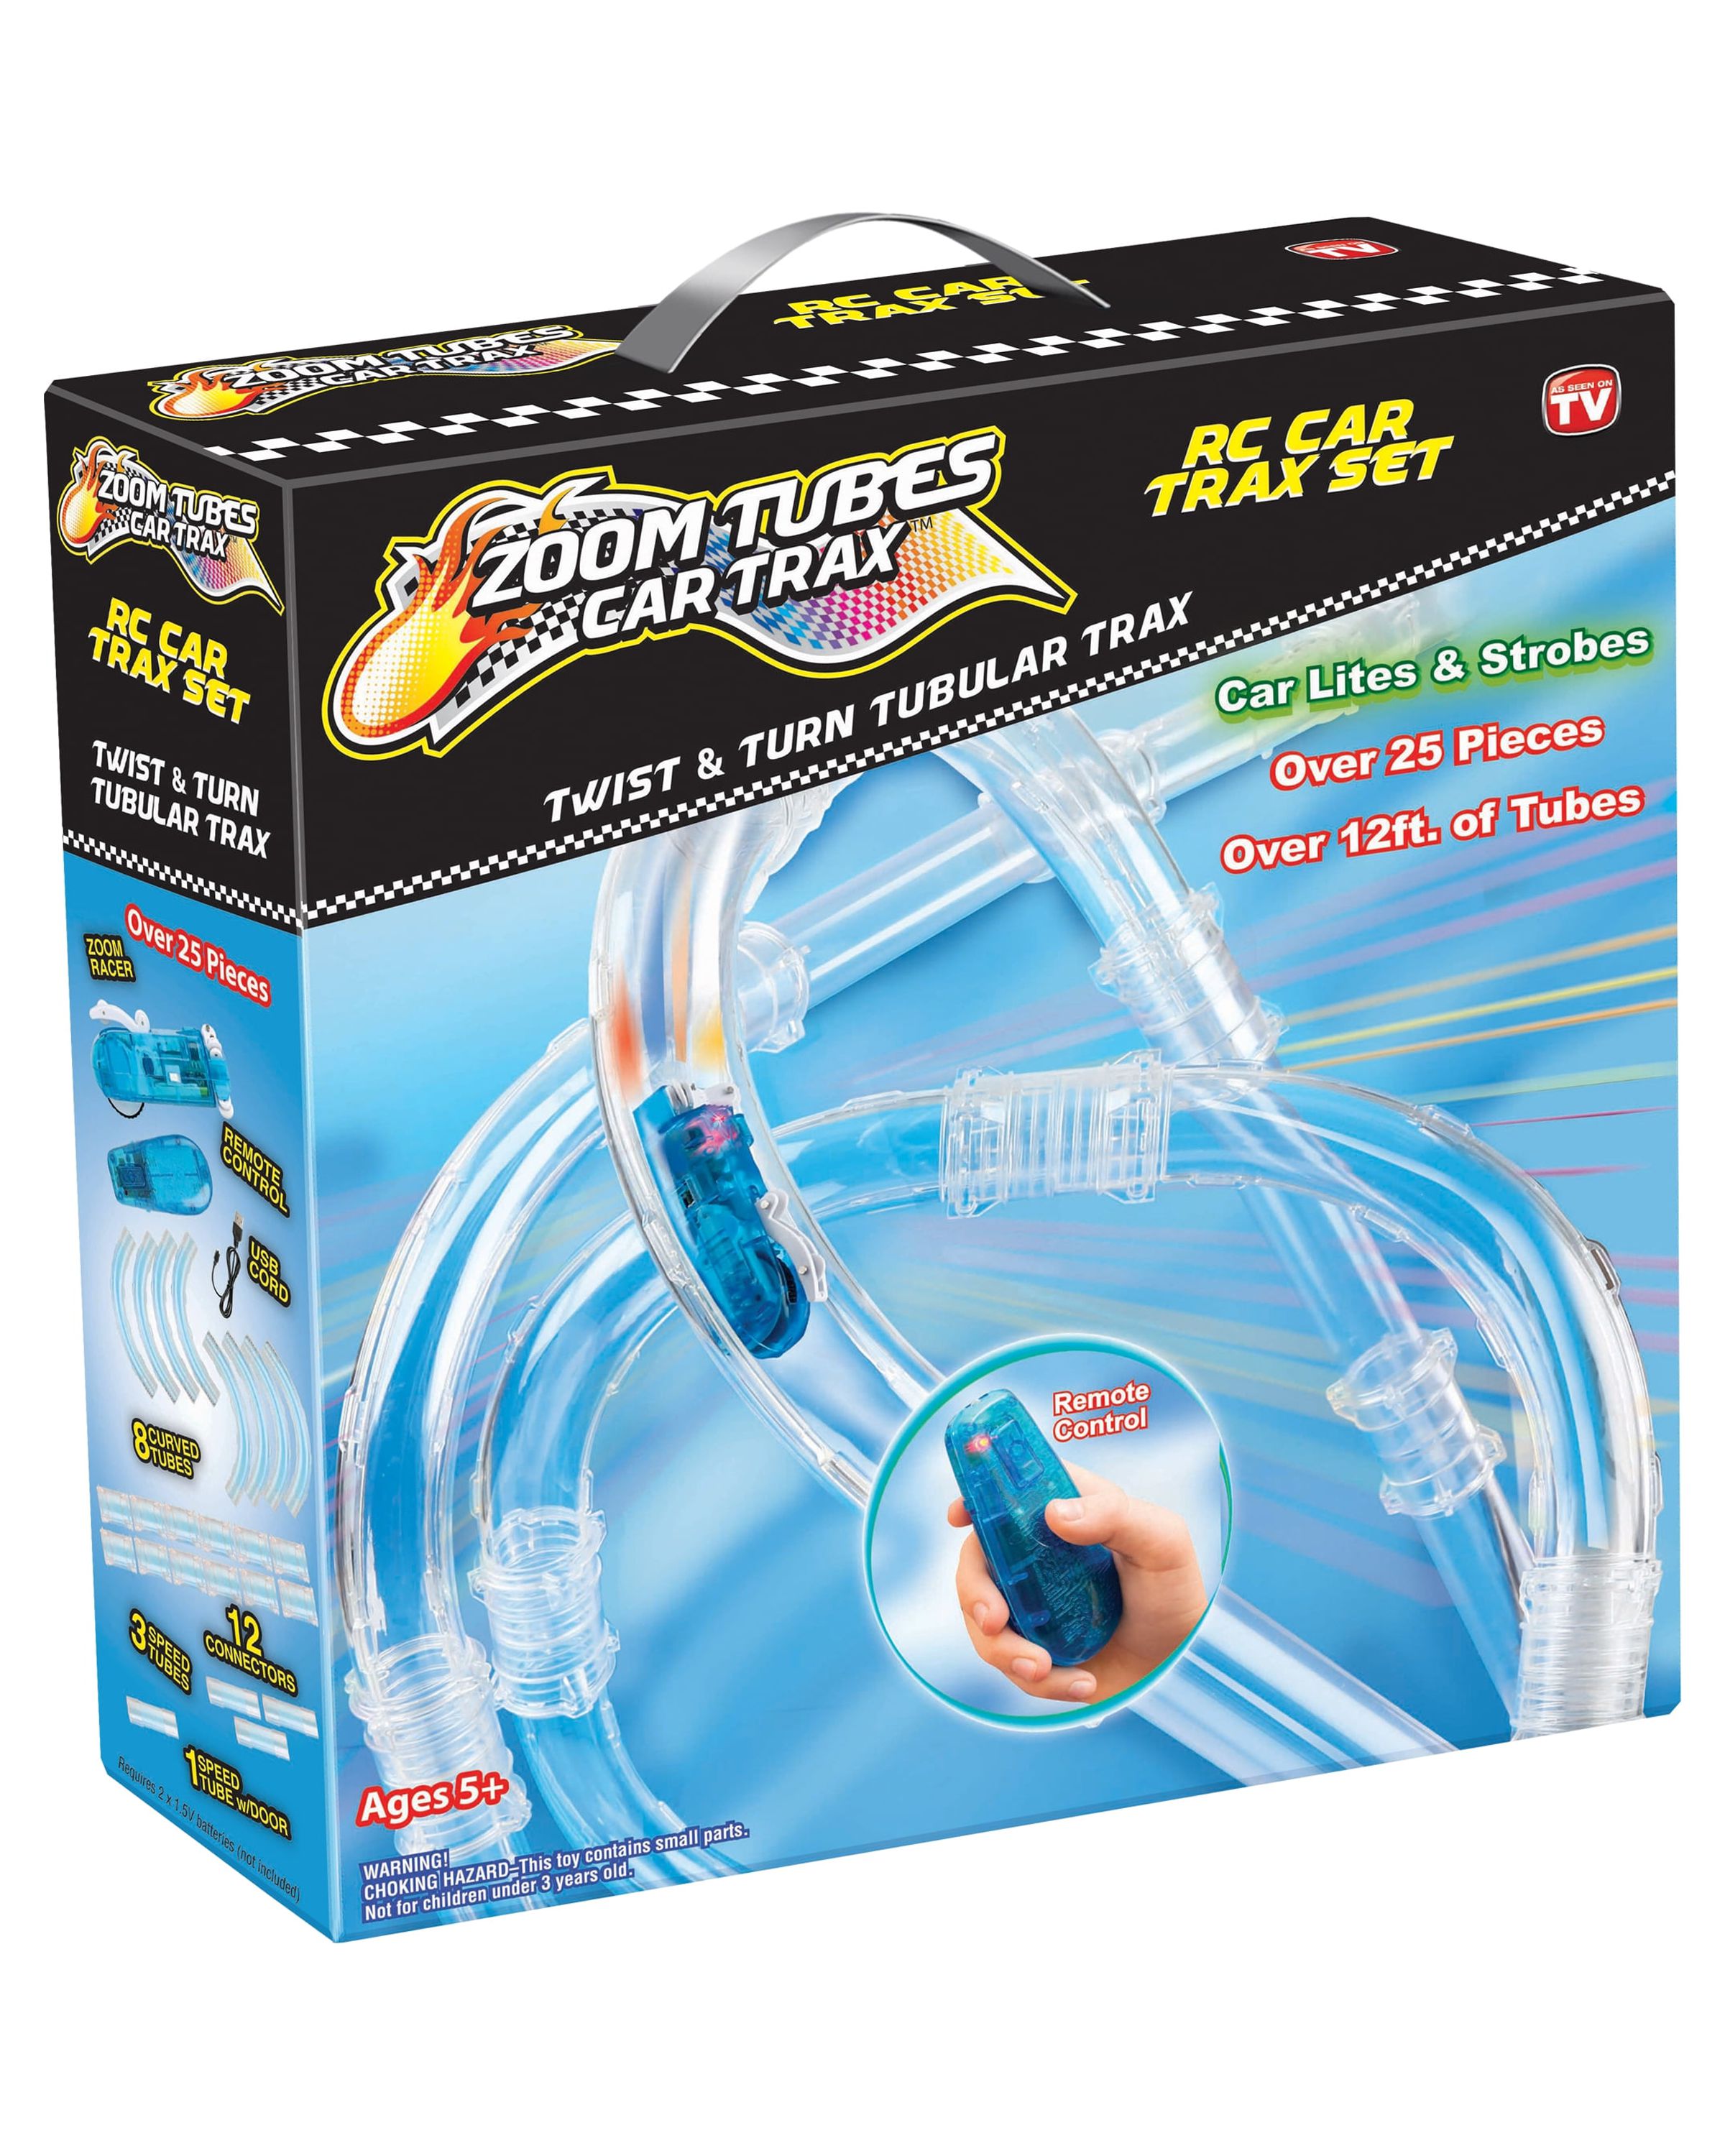 ZOOM TUBES CAR TRAX, 25-Pc RC Car Trax Set with 1 Blue Racer and Over 12ft of Tubes (As Seen on TV) - image 1 of 5